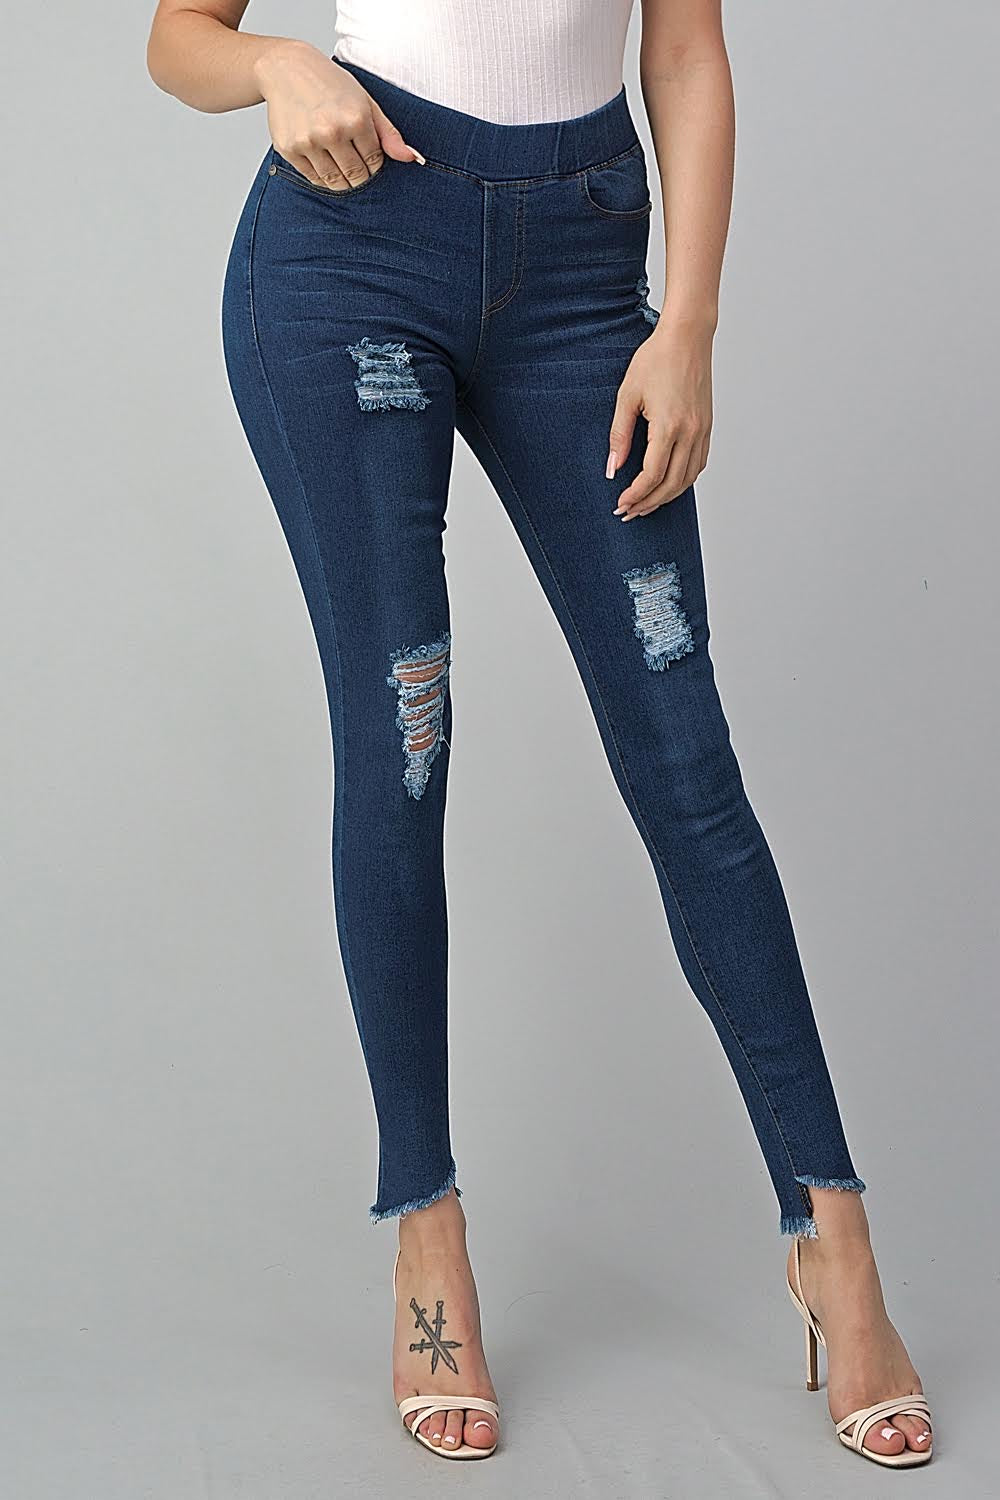 Womens Distressed Jean Jeggings  Pull on Pants  MomMe and More